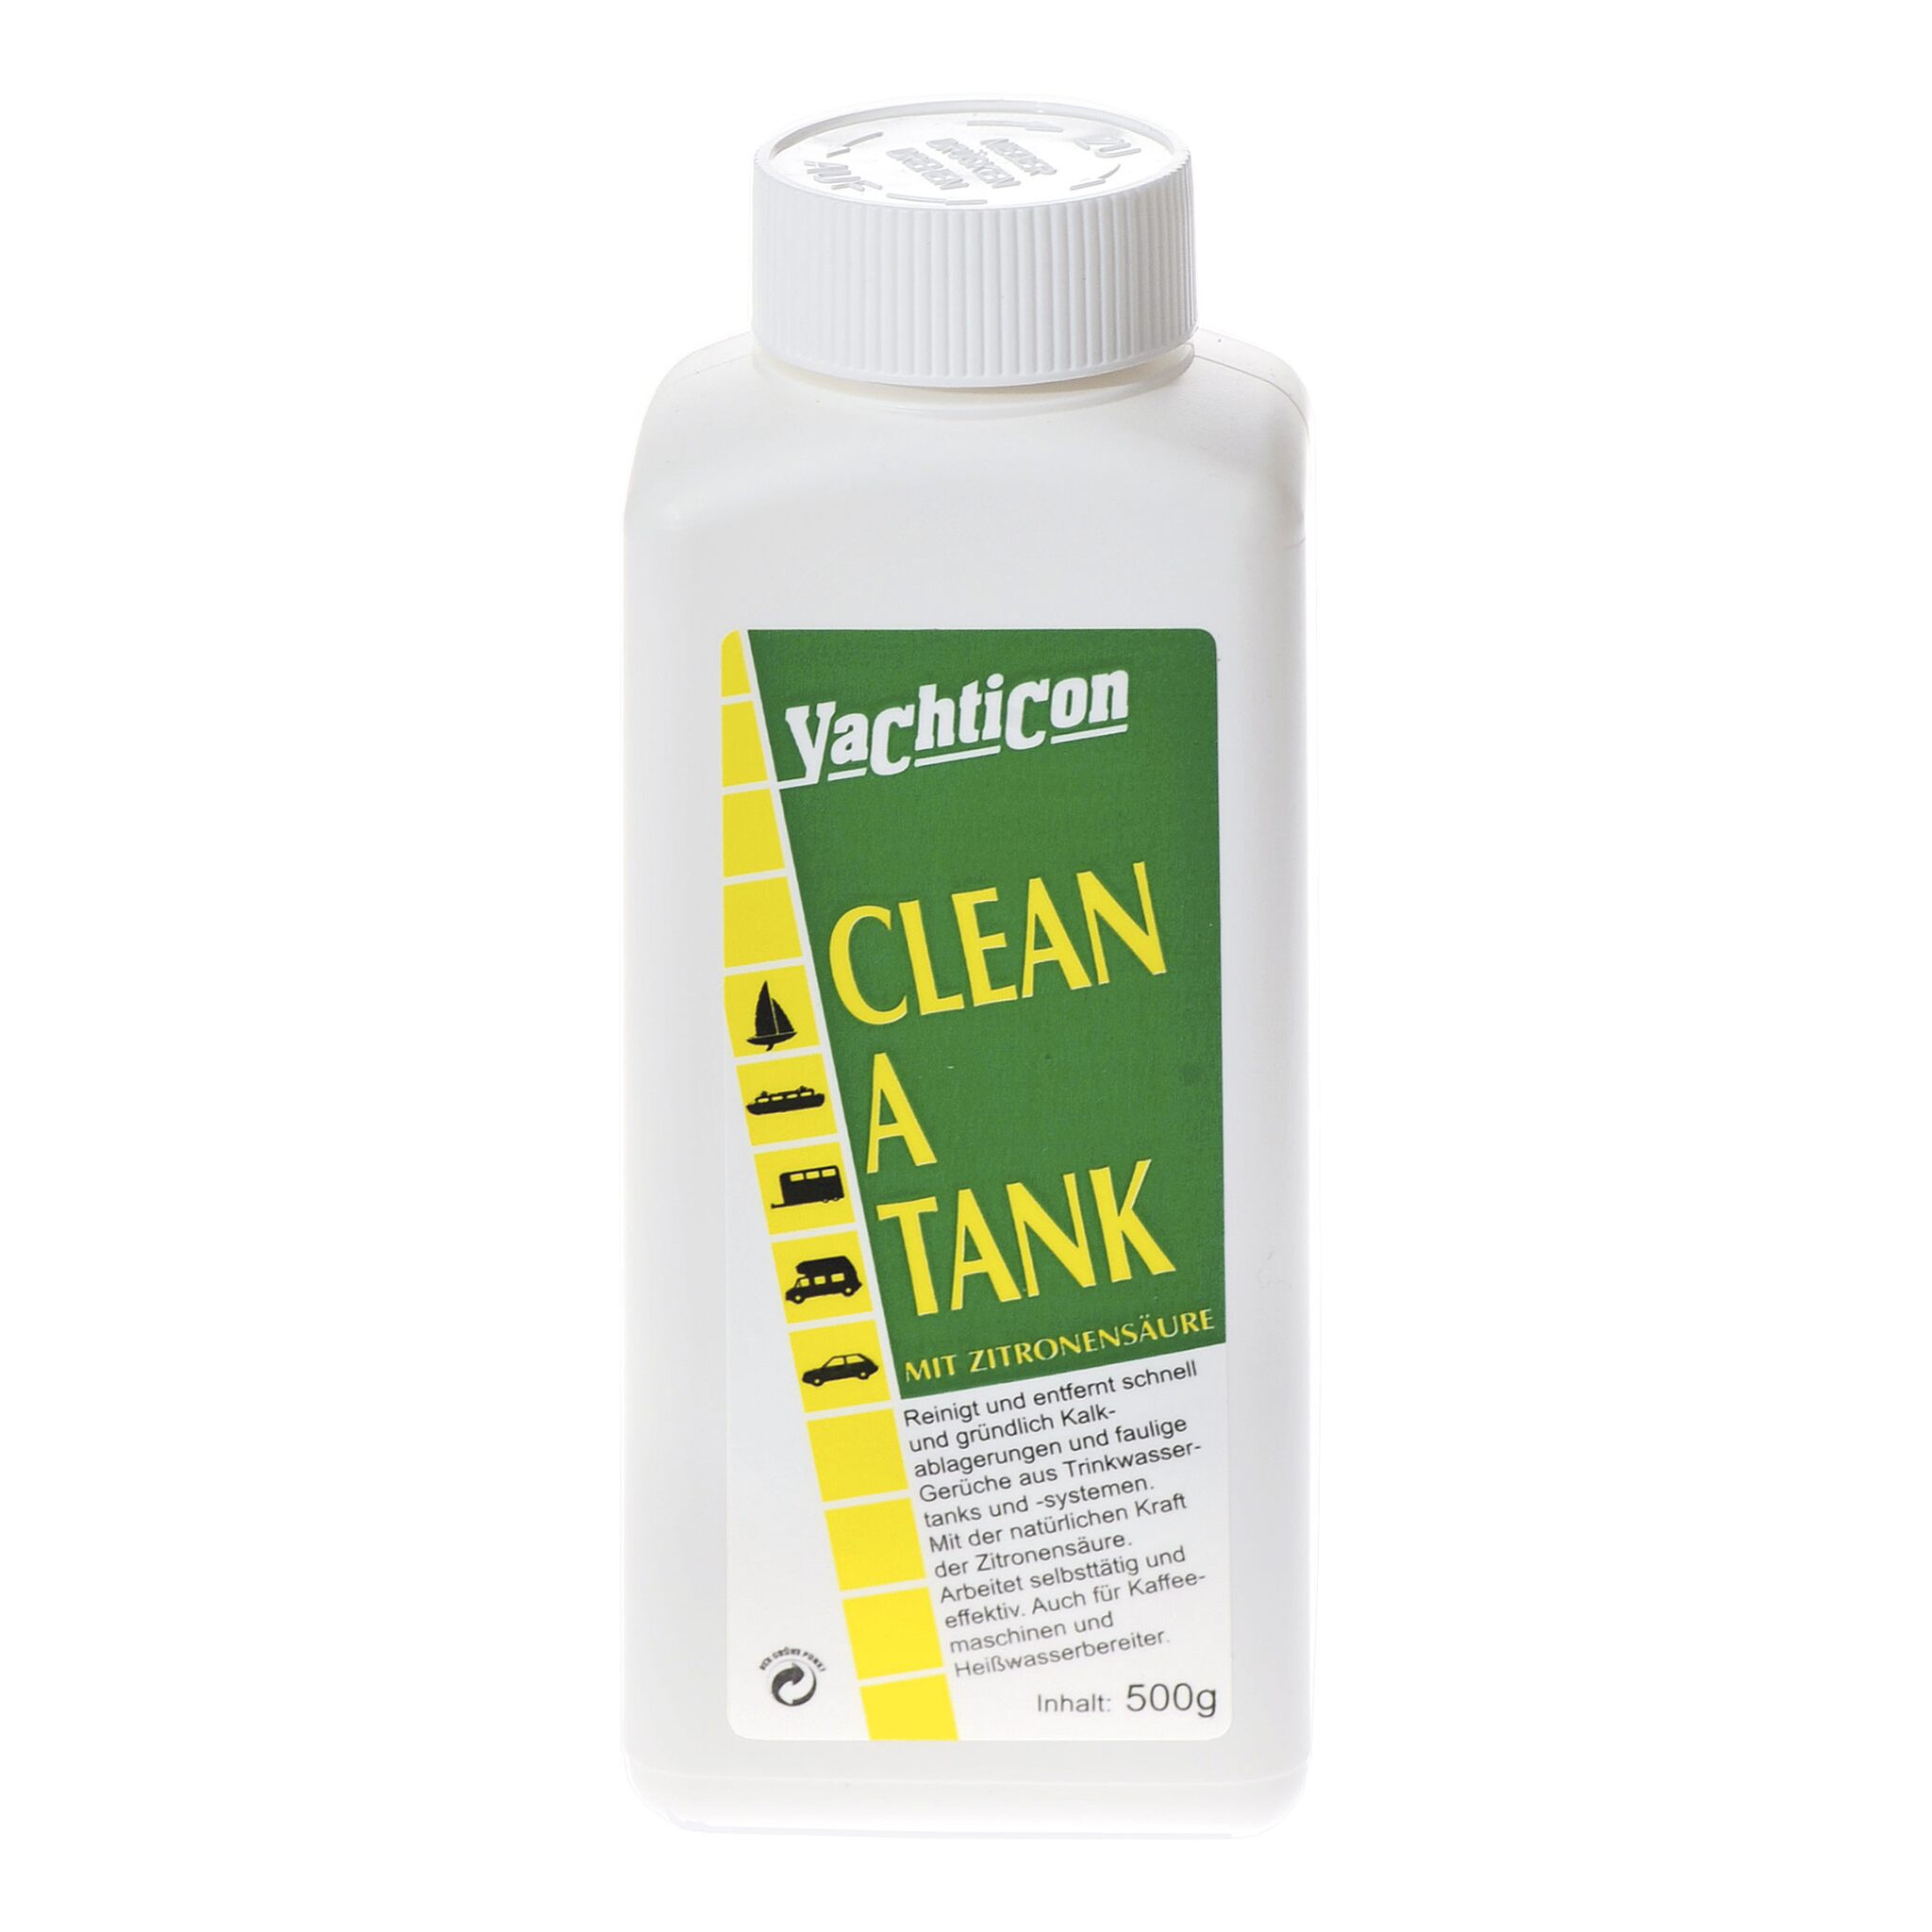 Yachticon Tank Cleaner Clean A Tank